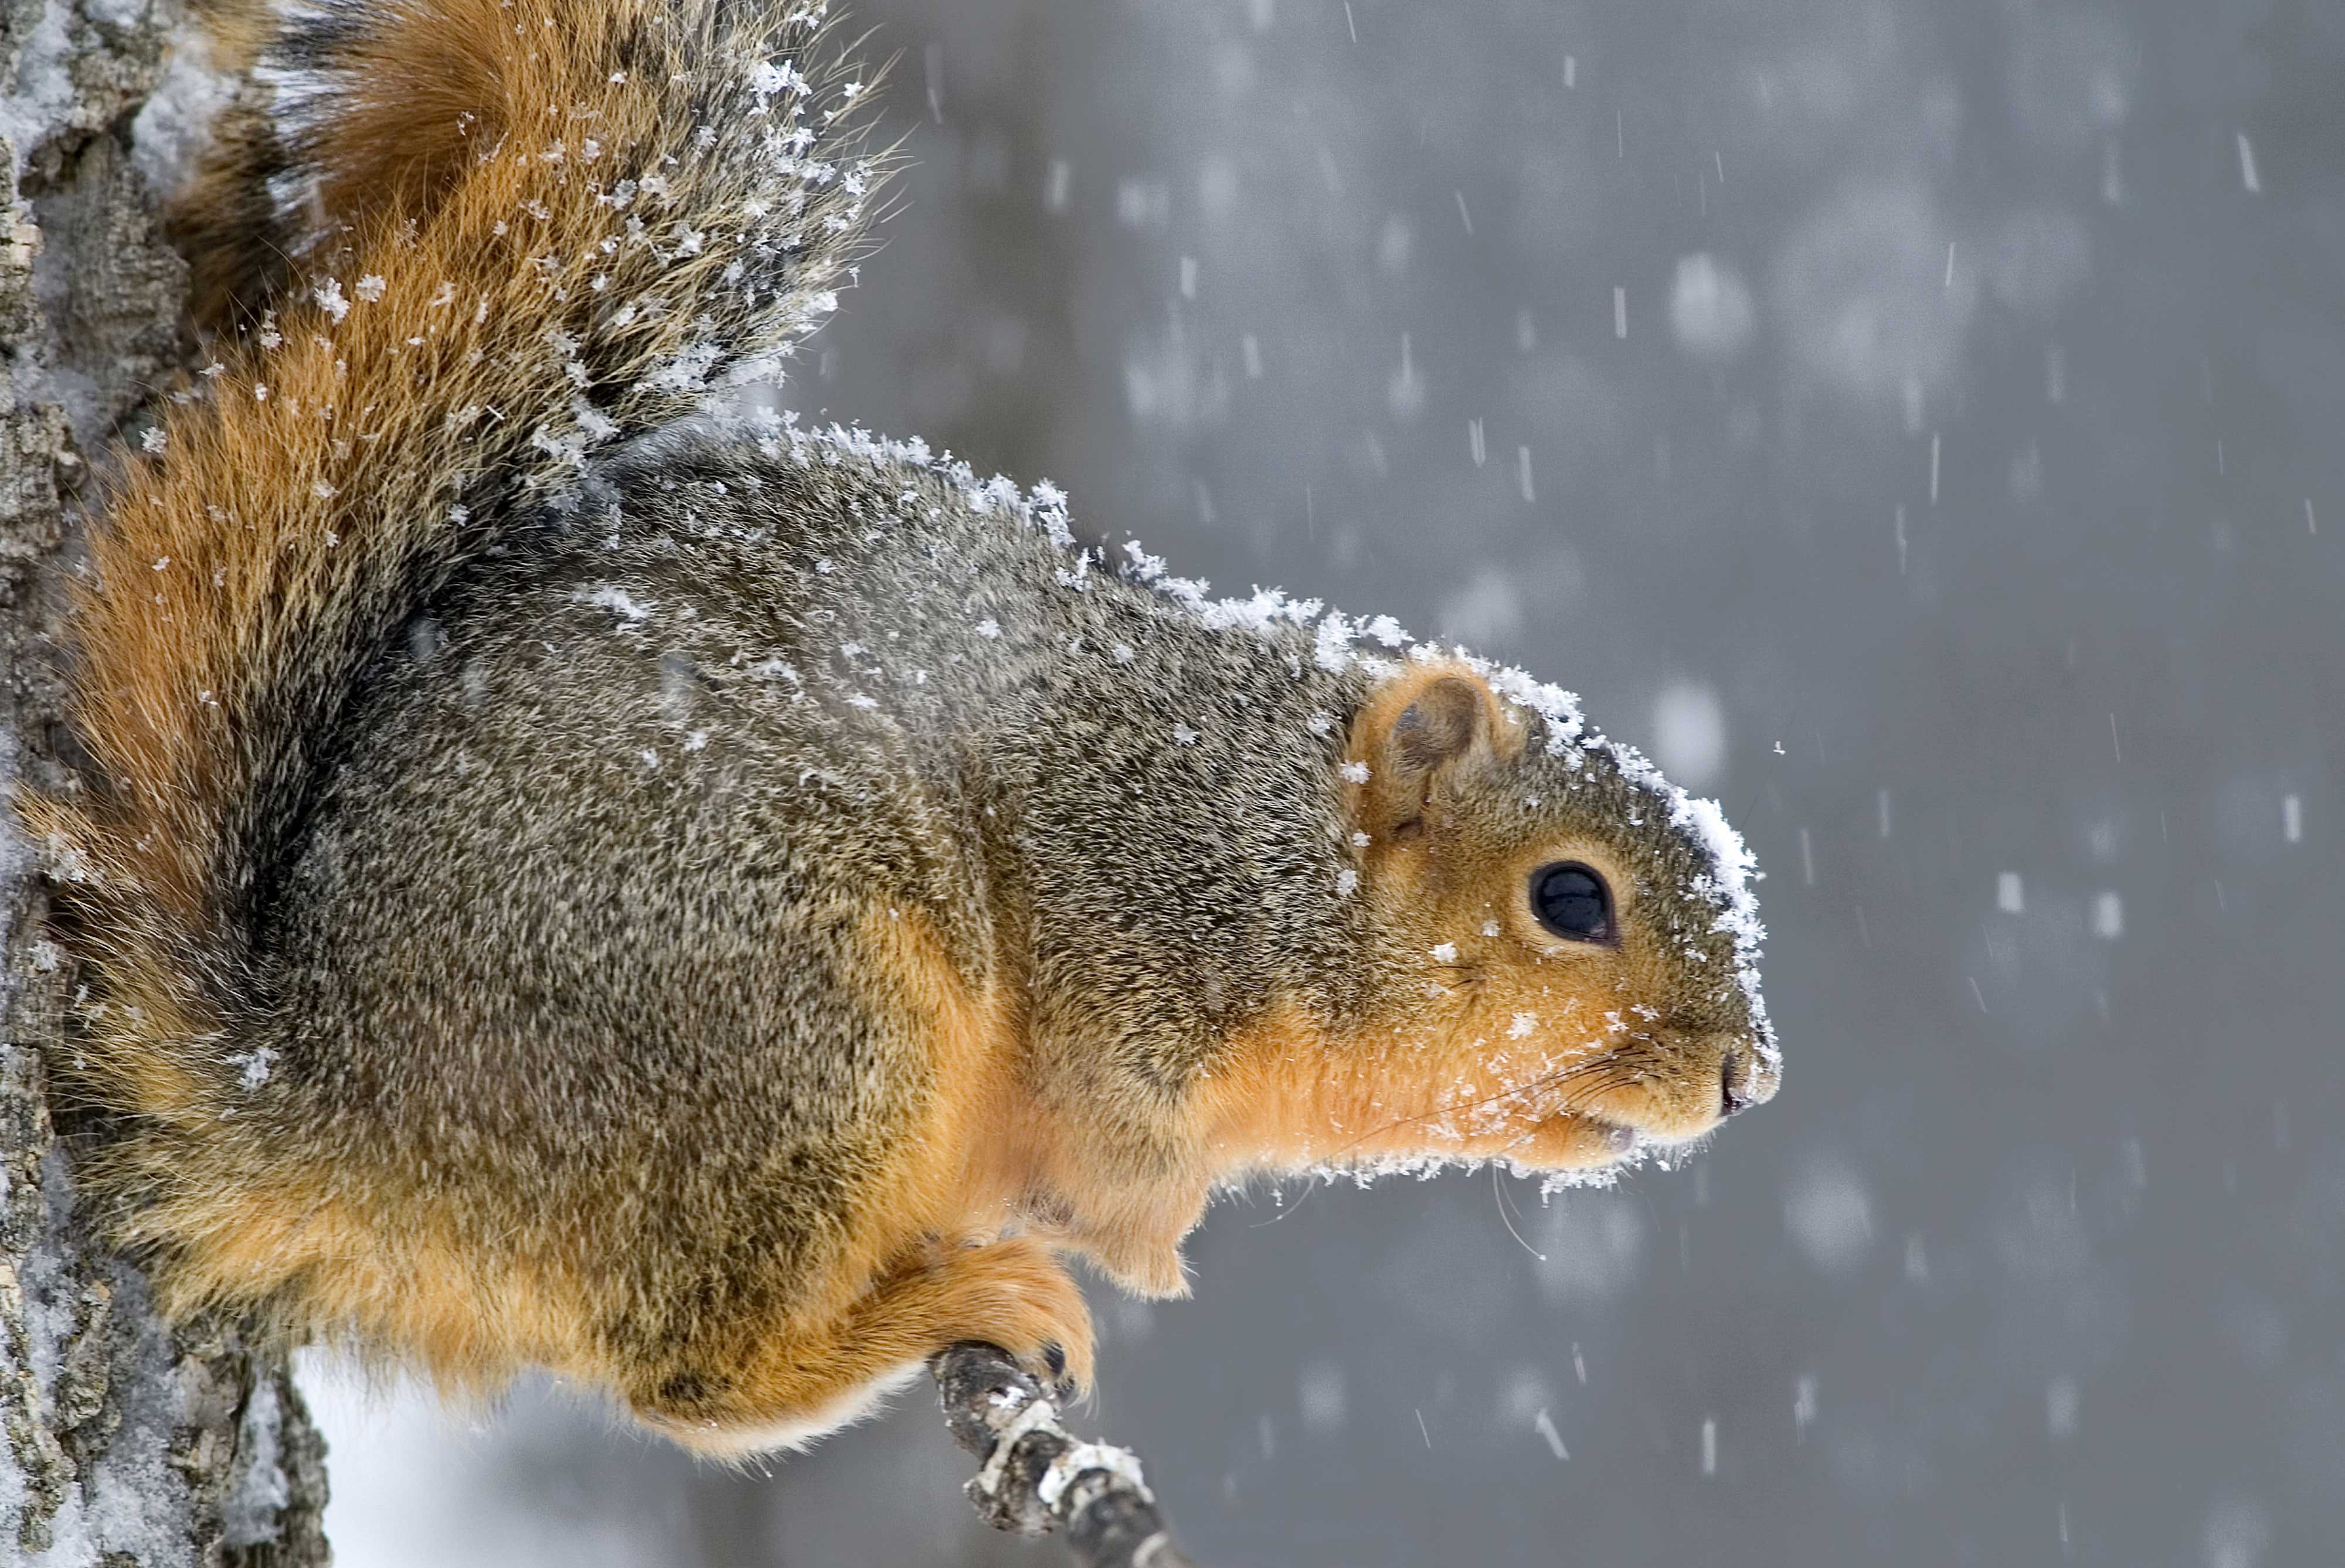 Close-up of a squirrel with snow in the background.